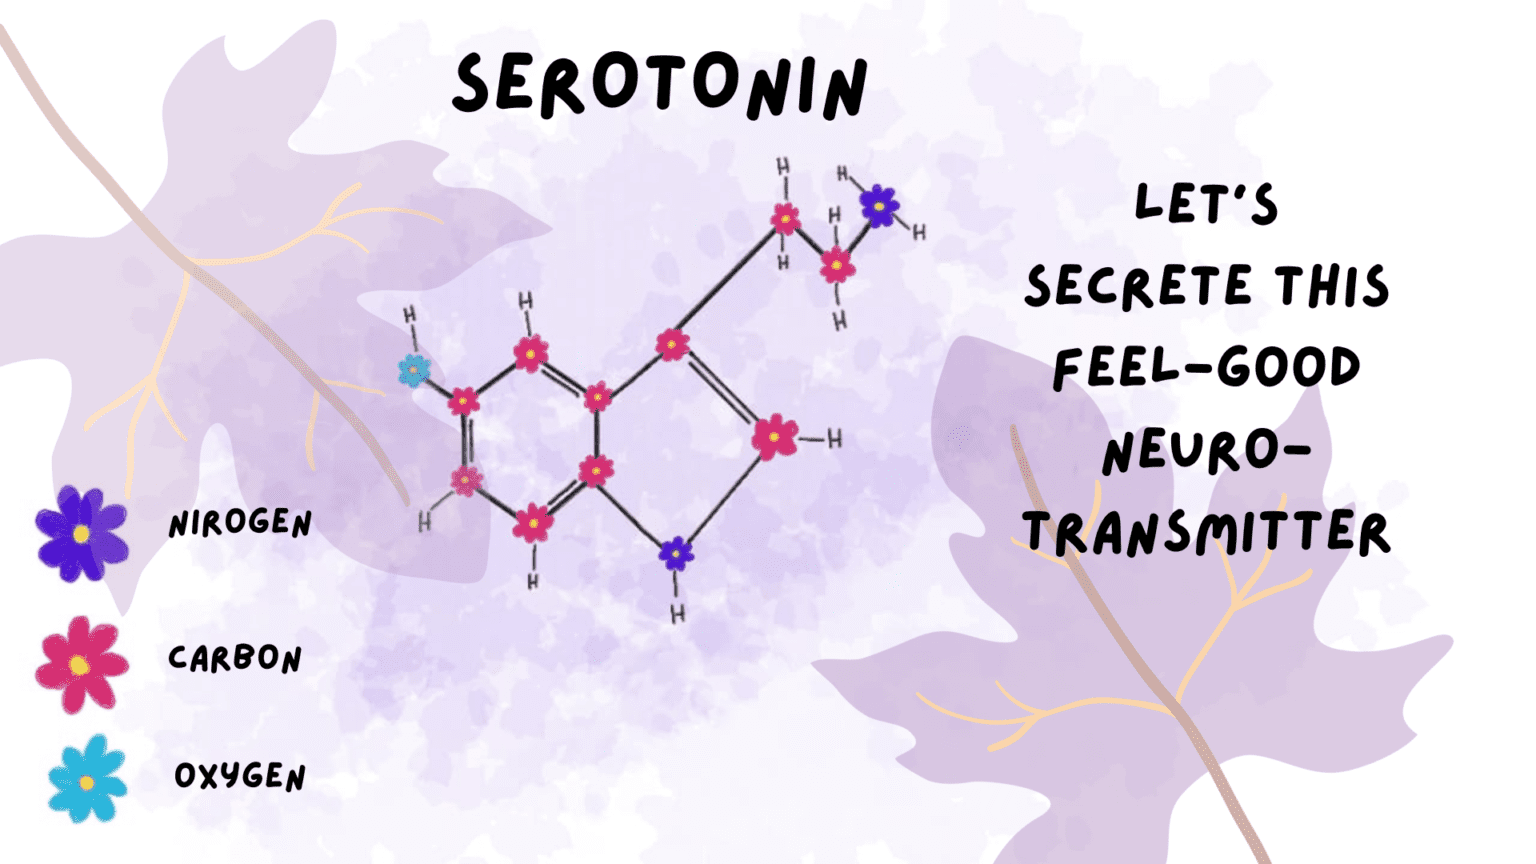 How serotonin is released at synapses as a neurotransmitter?